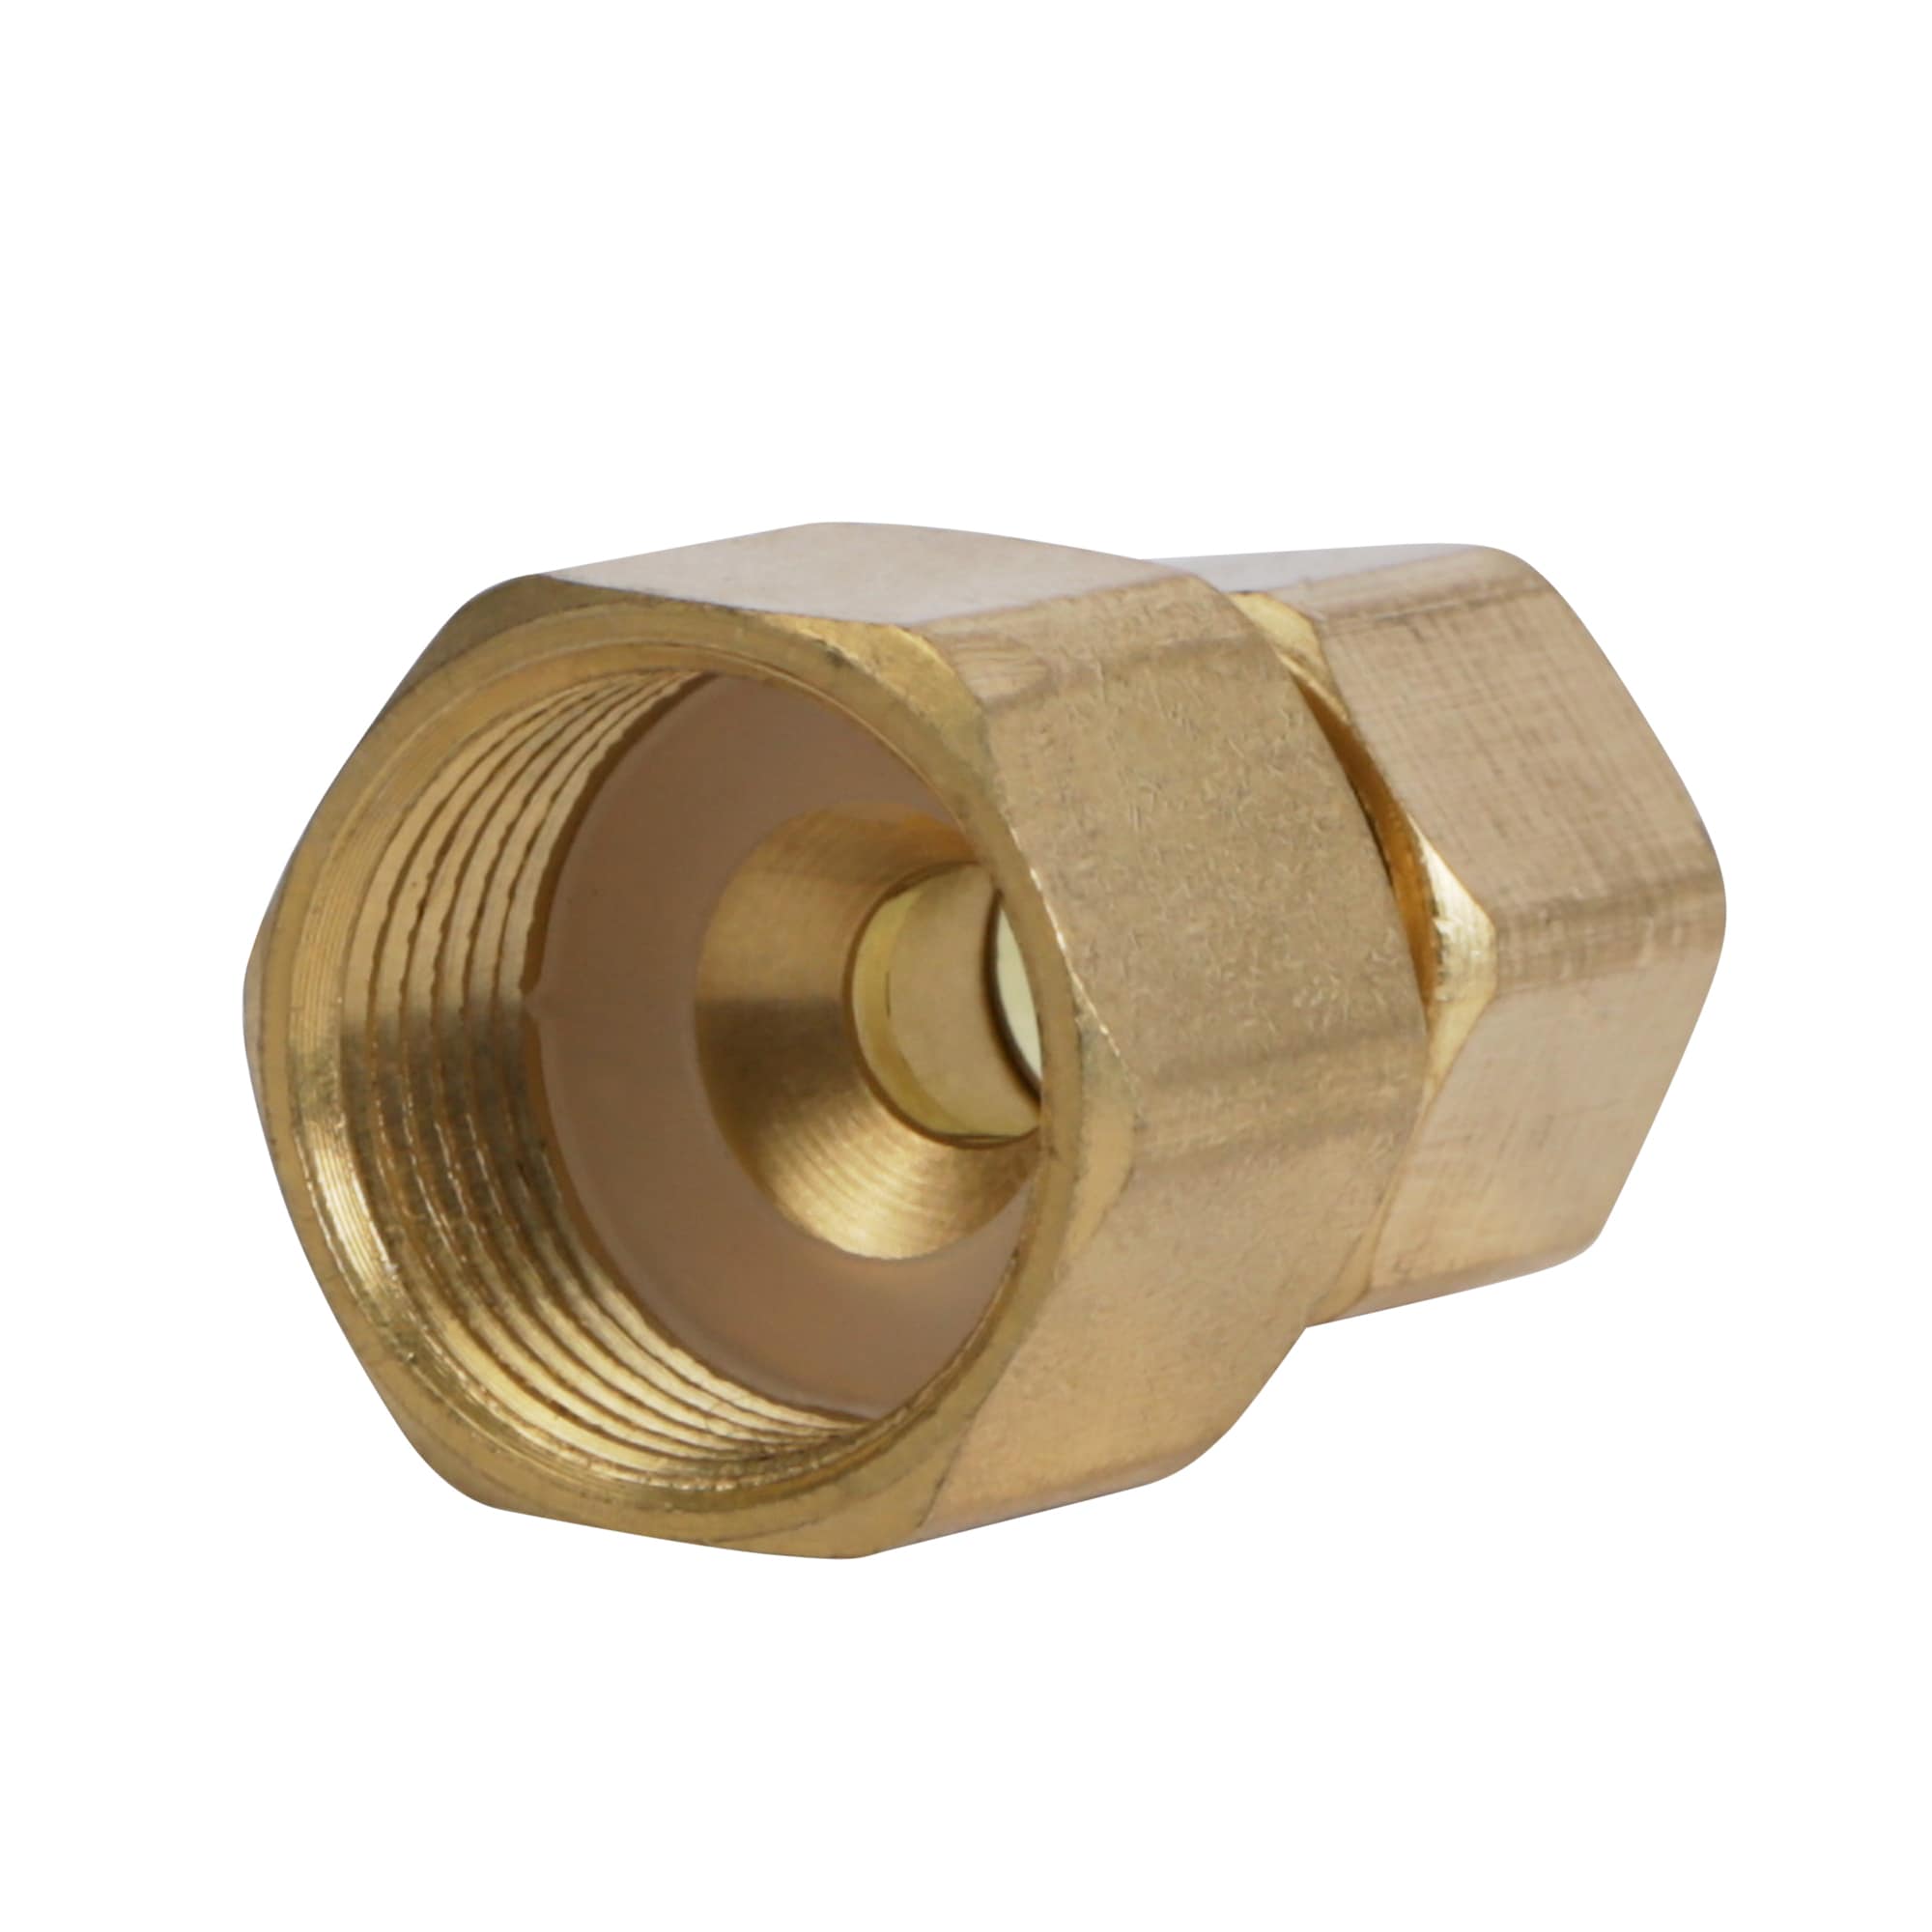 Proline Series 1-in x 3/4-in Threaded Coupling Fitting